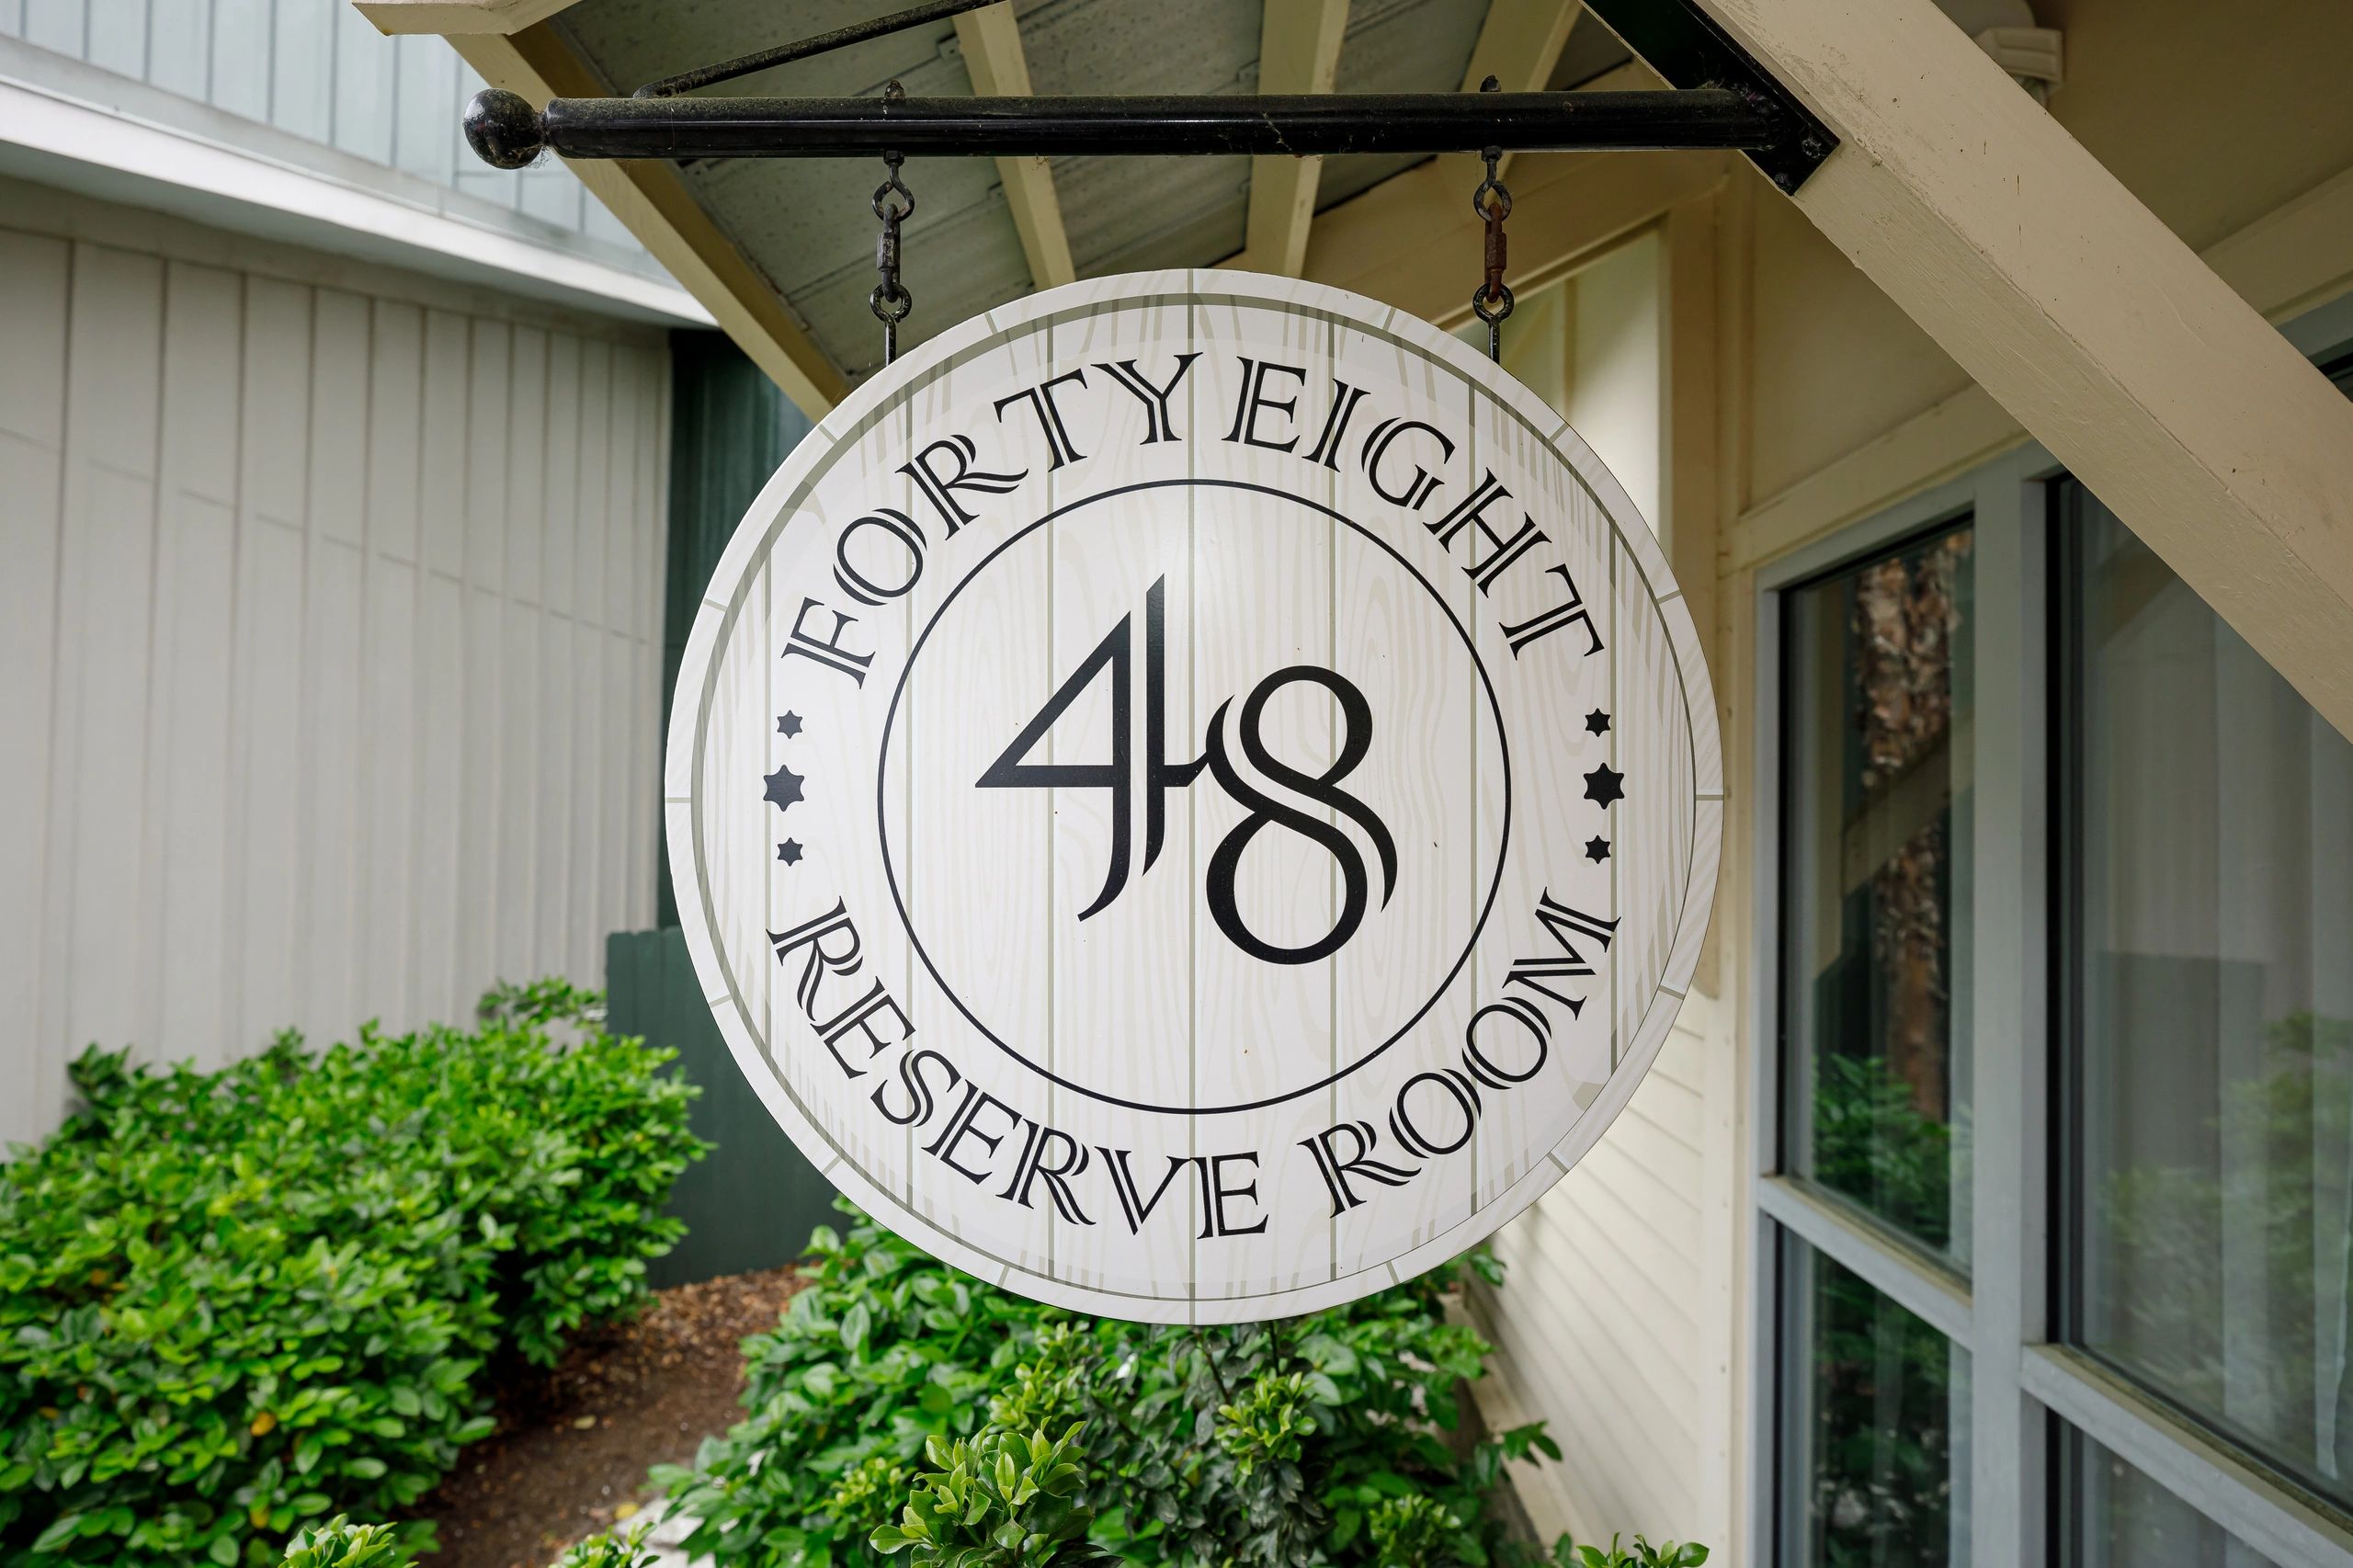 FortyEight - Reserve Room